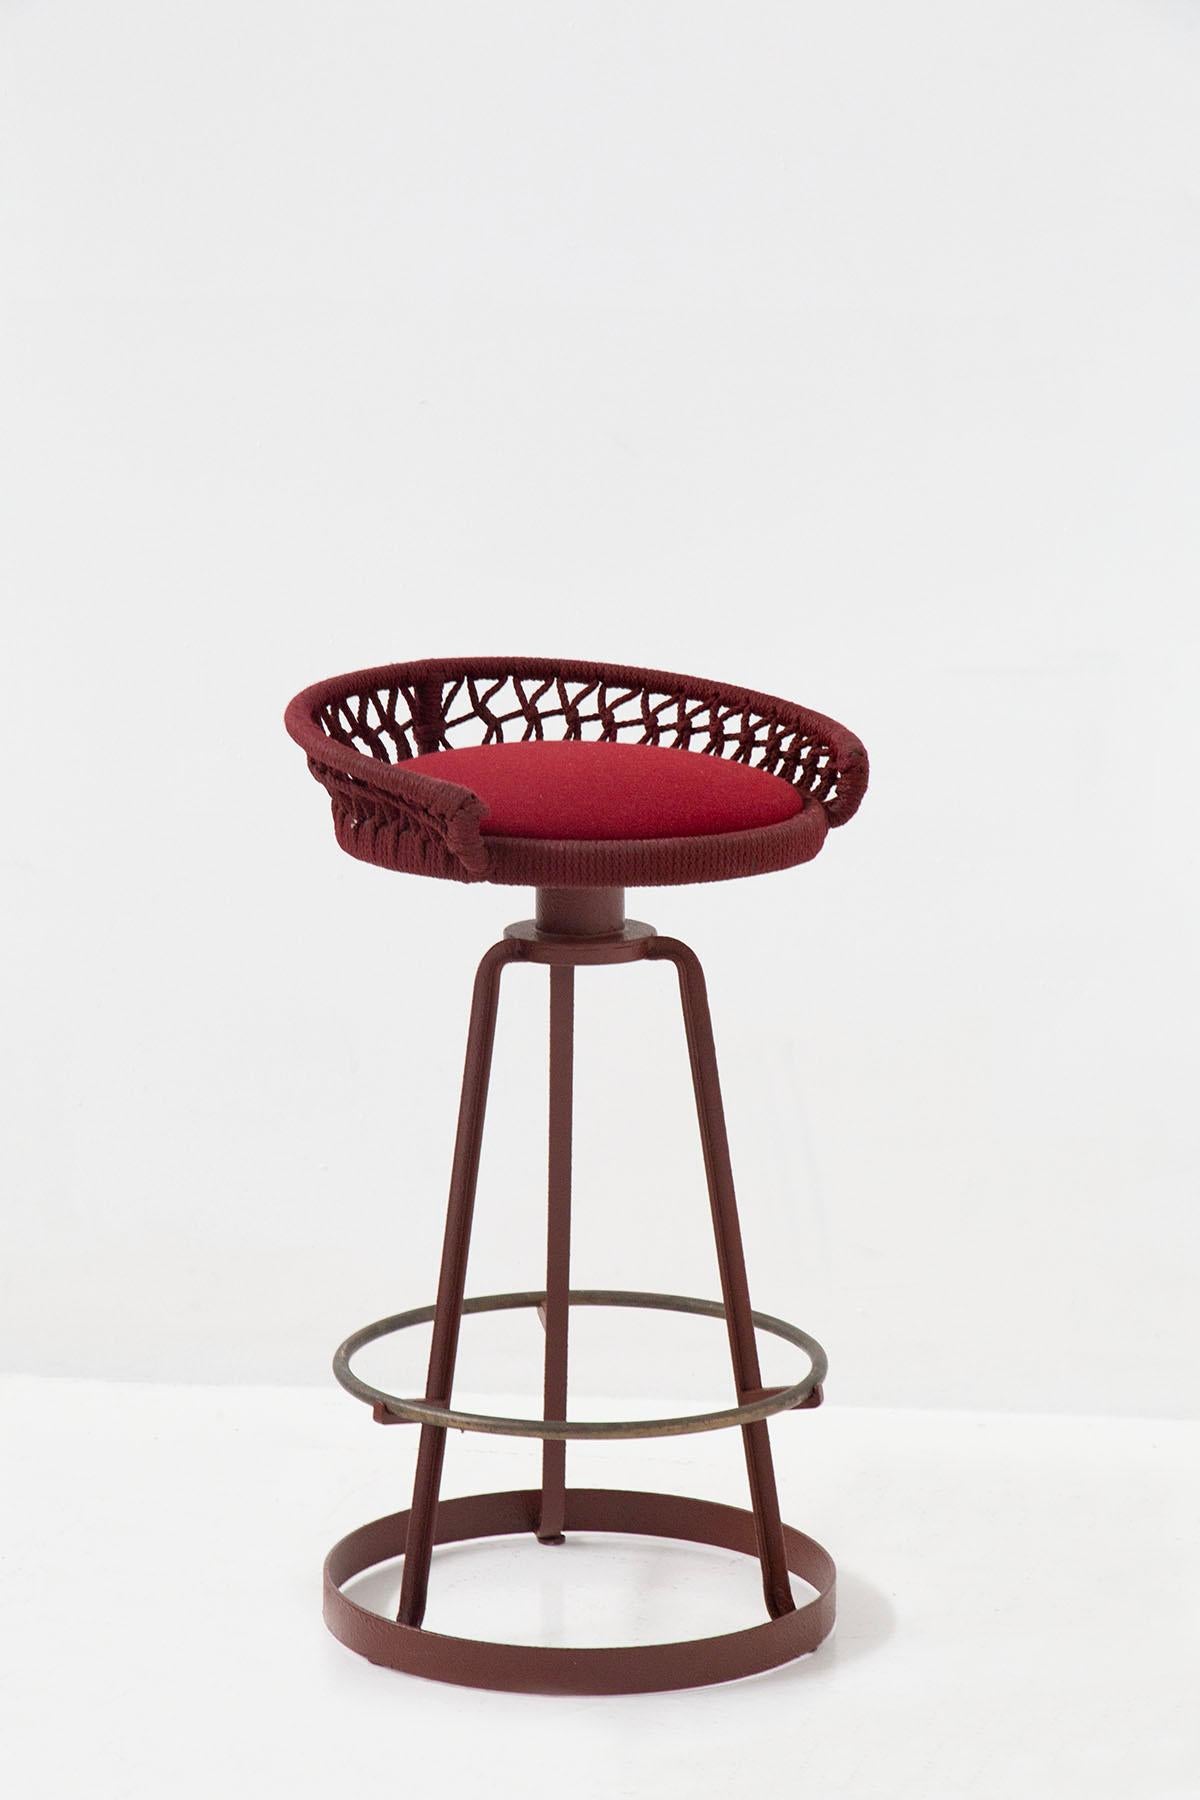 Marzio Cecchi Pair of Italian Red Rope High Stools In Good Condition For Sale In Milano, IT